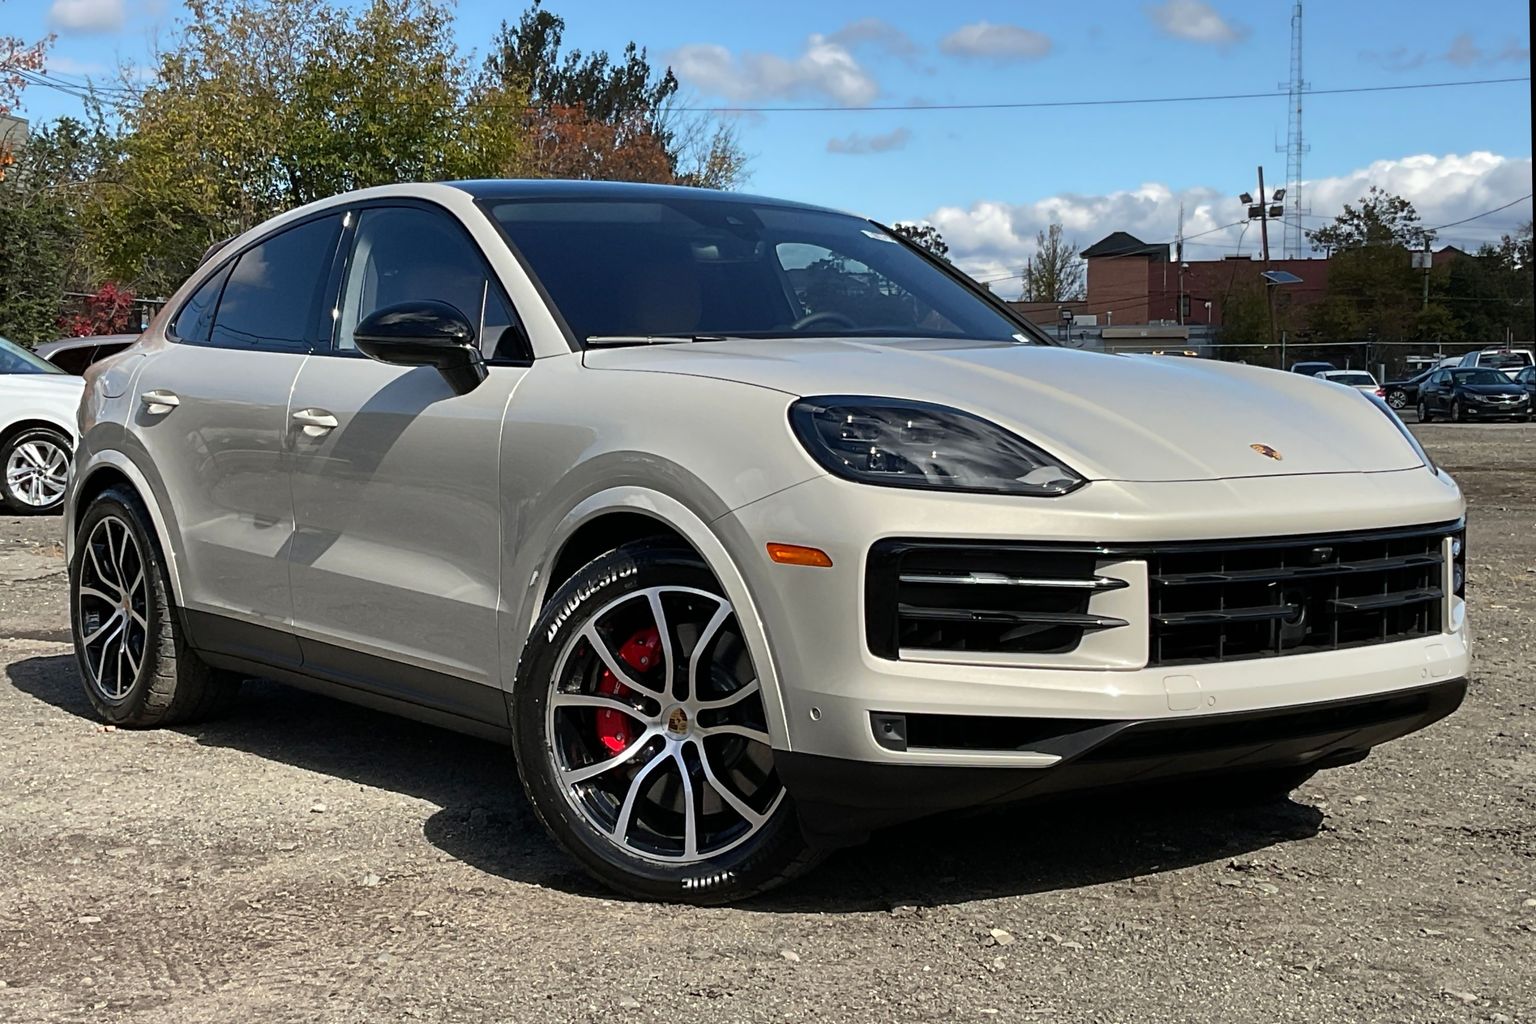 New Porsche Recall/Stop sell - any details?